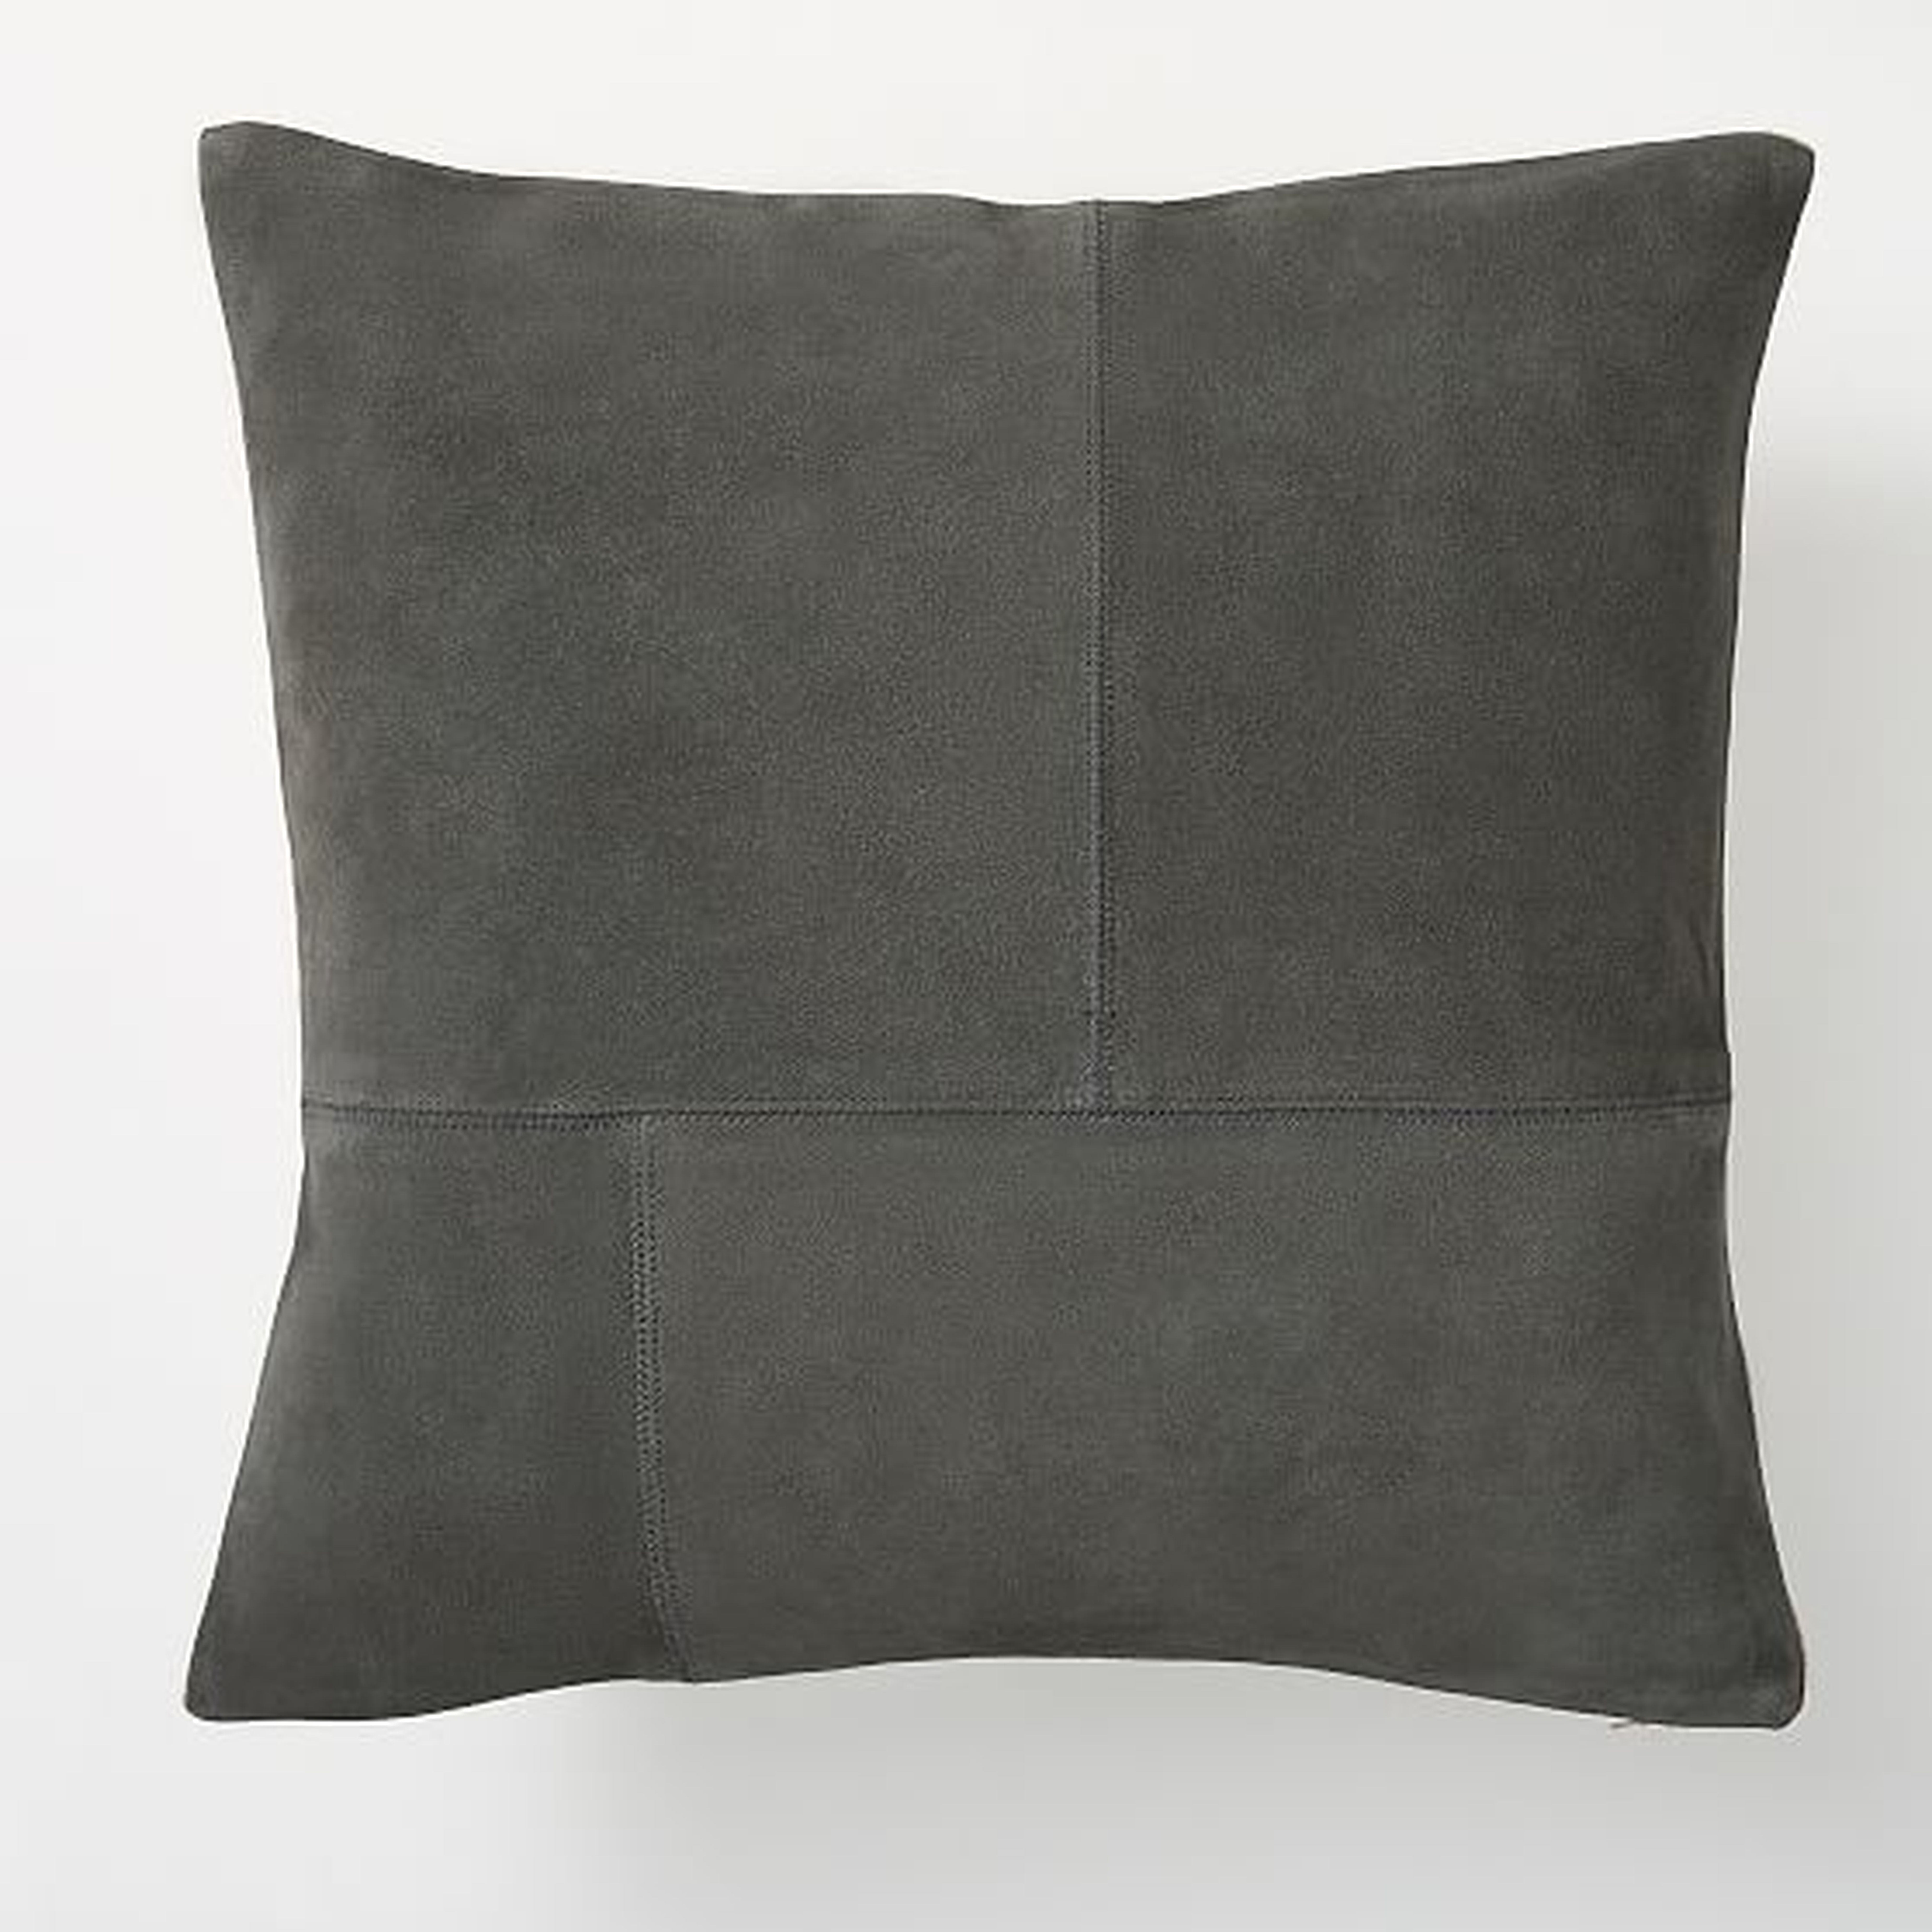 Pieced Suede Pillow Cover, Charcoal, 20"x20" - West Elm